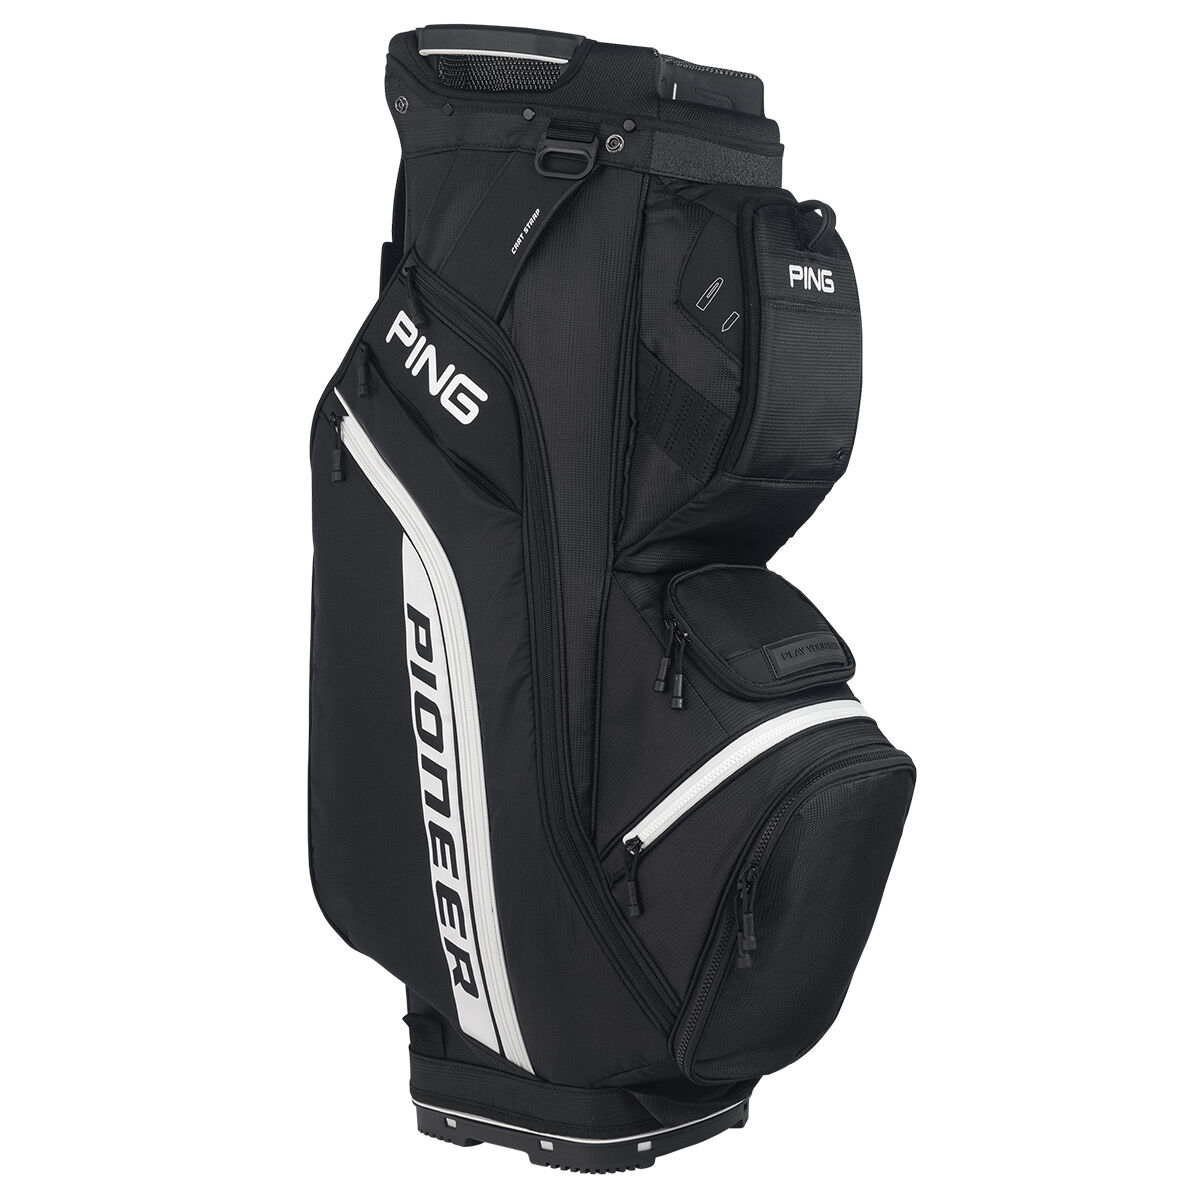 Ping Black and White Lightweight Pioneer 214 Golf Cart Bag 2022 | American Golf, One Size von Ping